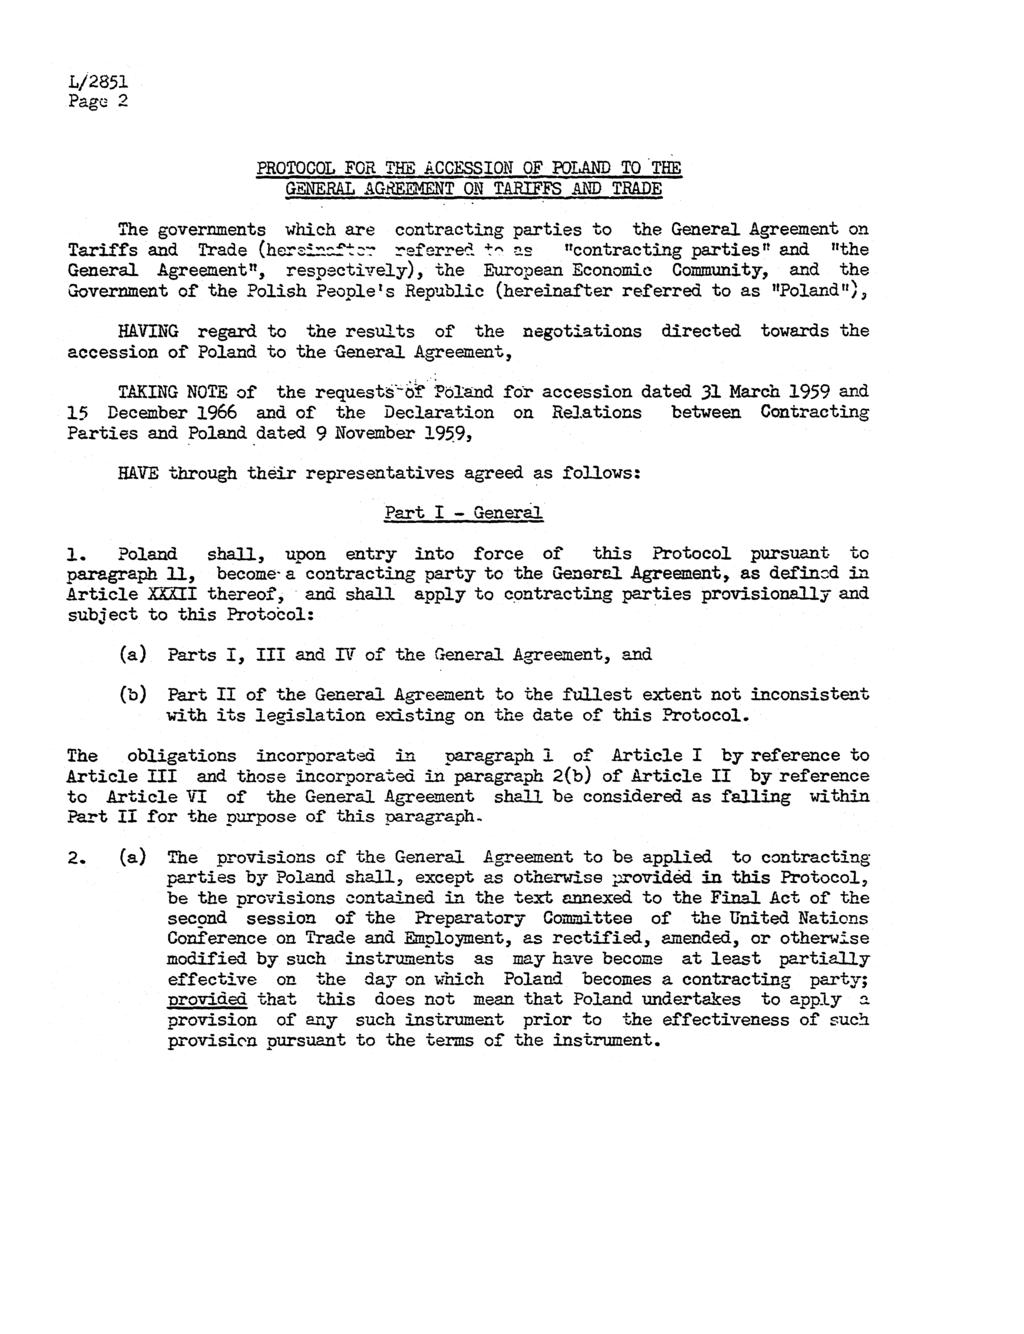 Page 2 PROTOCOL FOR THE ACCESSION OF POLAND TO THE GENERAL AGREEMENT ON TARIFFS AN TRADE The governments which are contracting parties to the General Agreement on Tariffs and Trade (here-f-ṟeferred